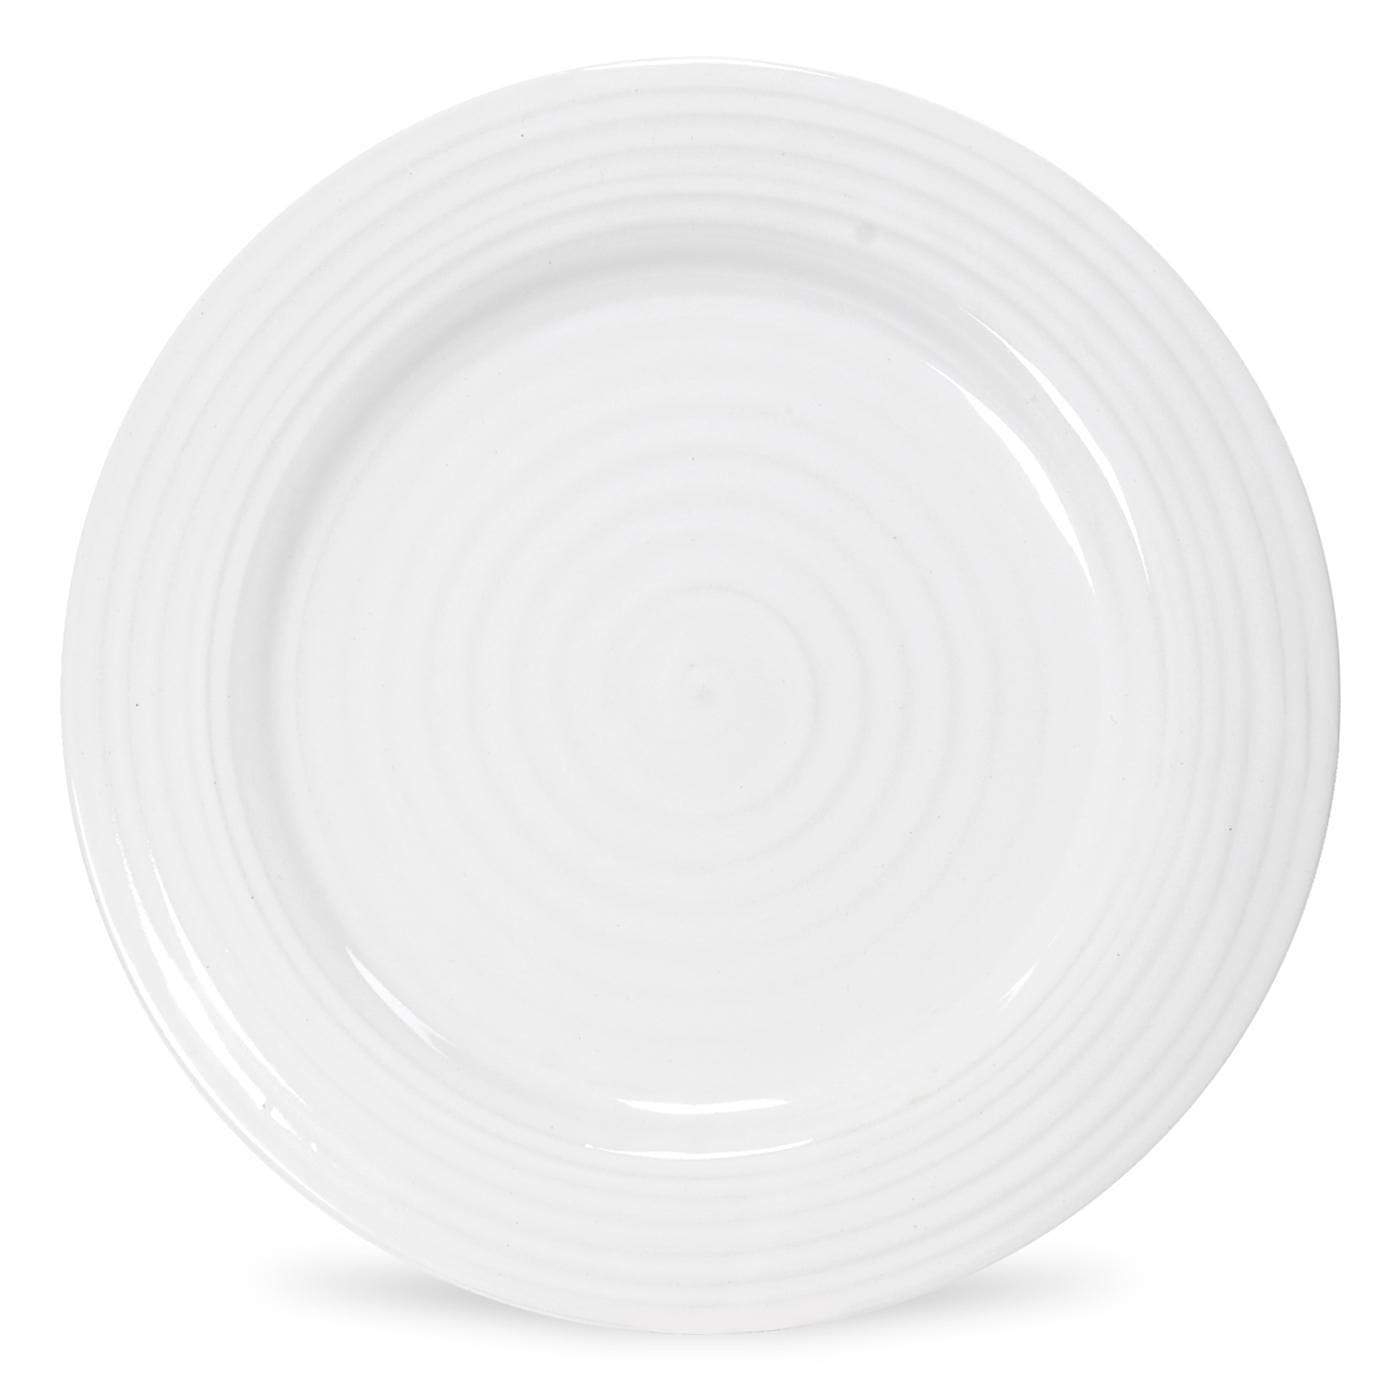 Sophie Conran for Portmeirion White Plate Set of 4 – 11 Inches